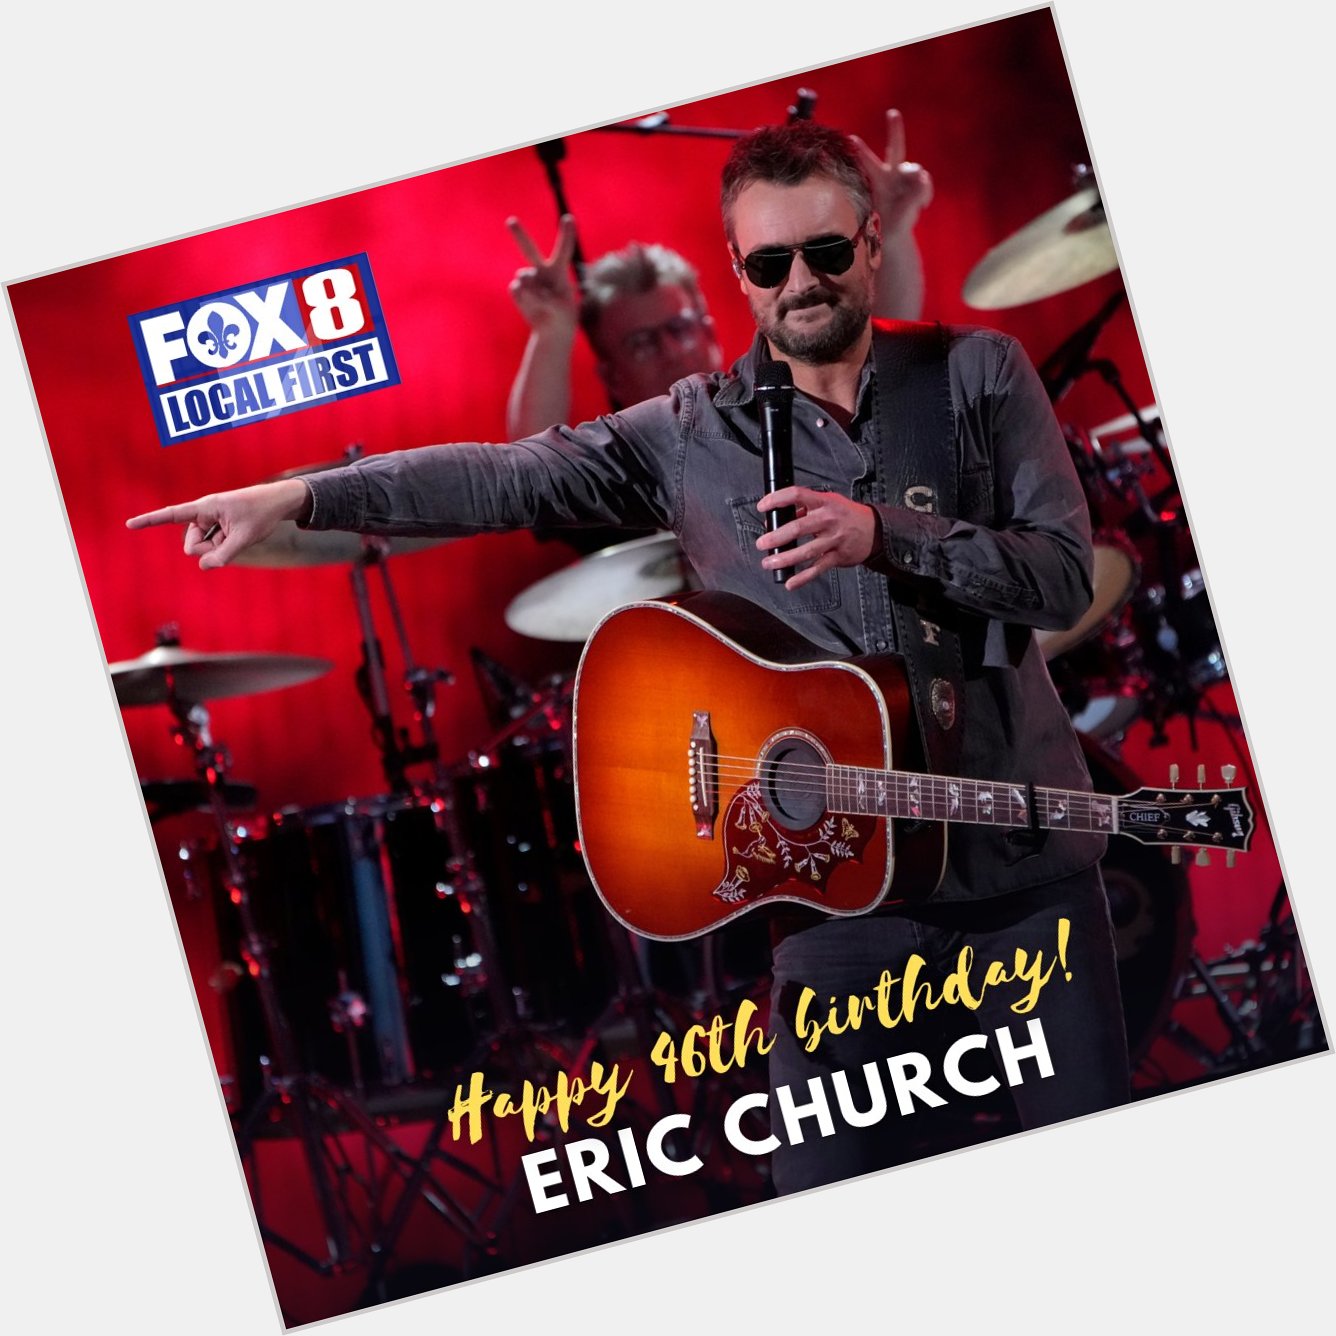 Happy birthday to Eric Church, the country music singer turned 46 on Wednesday! 